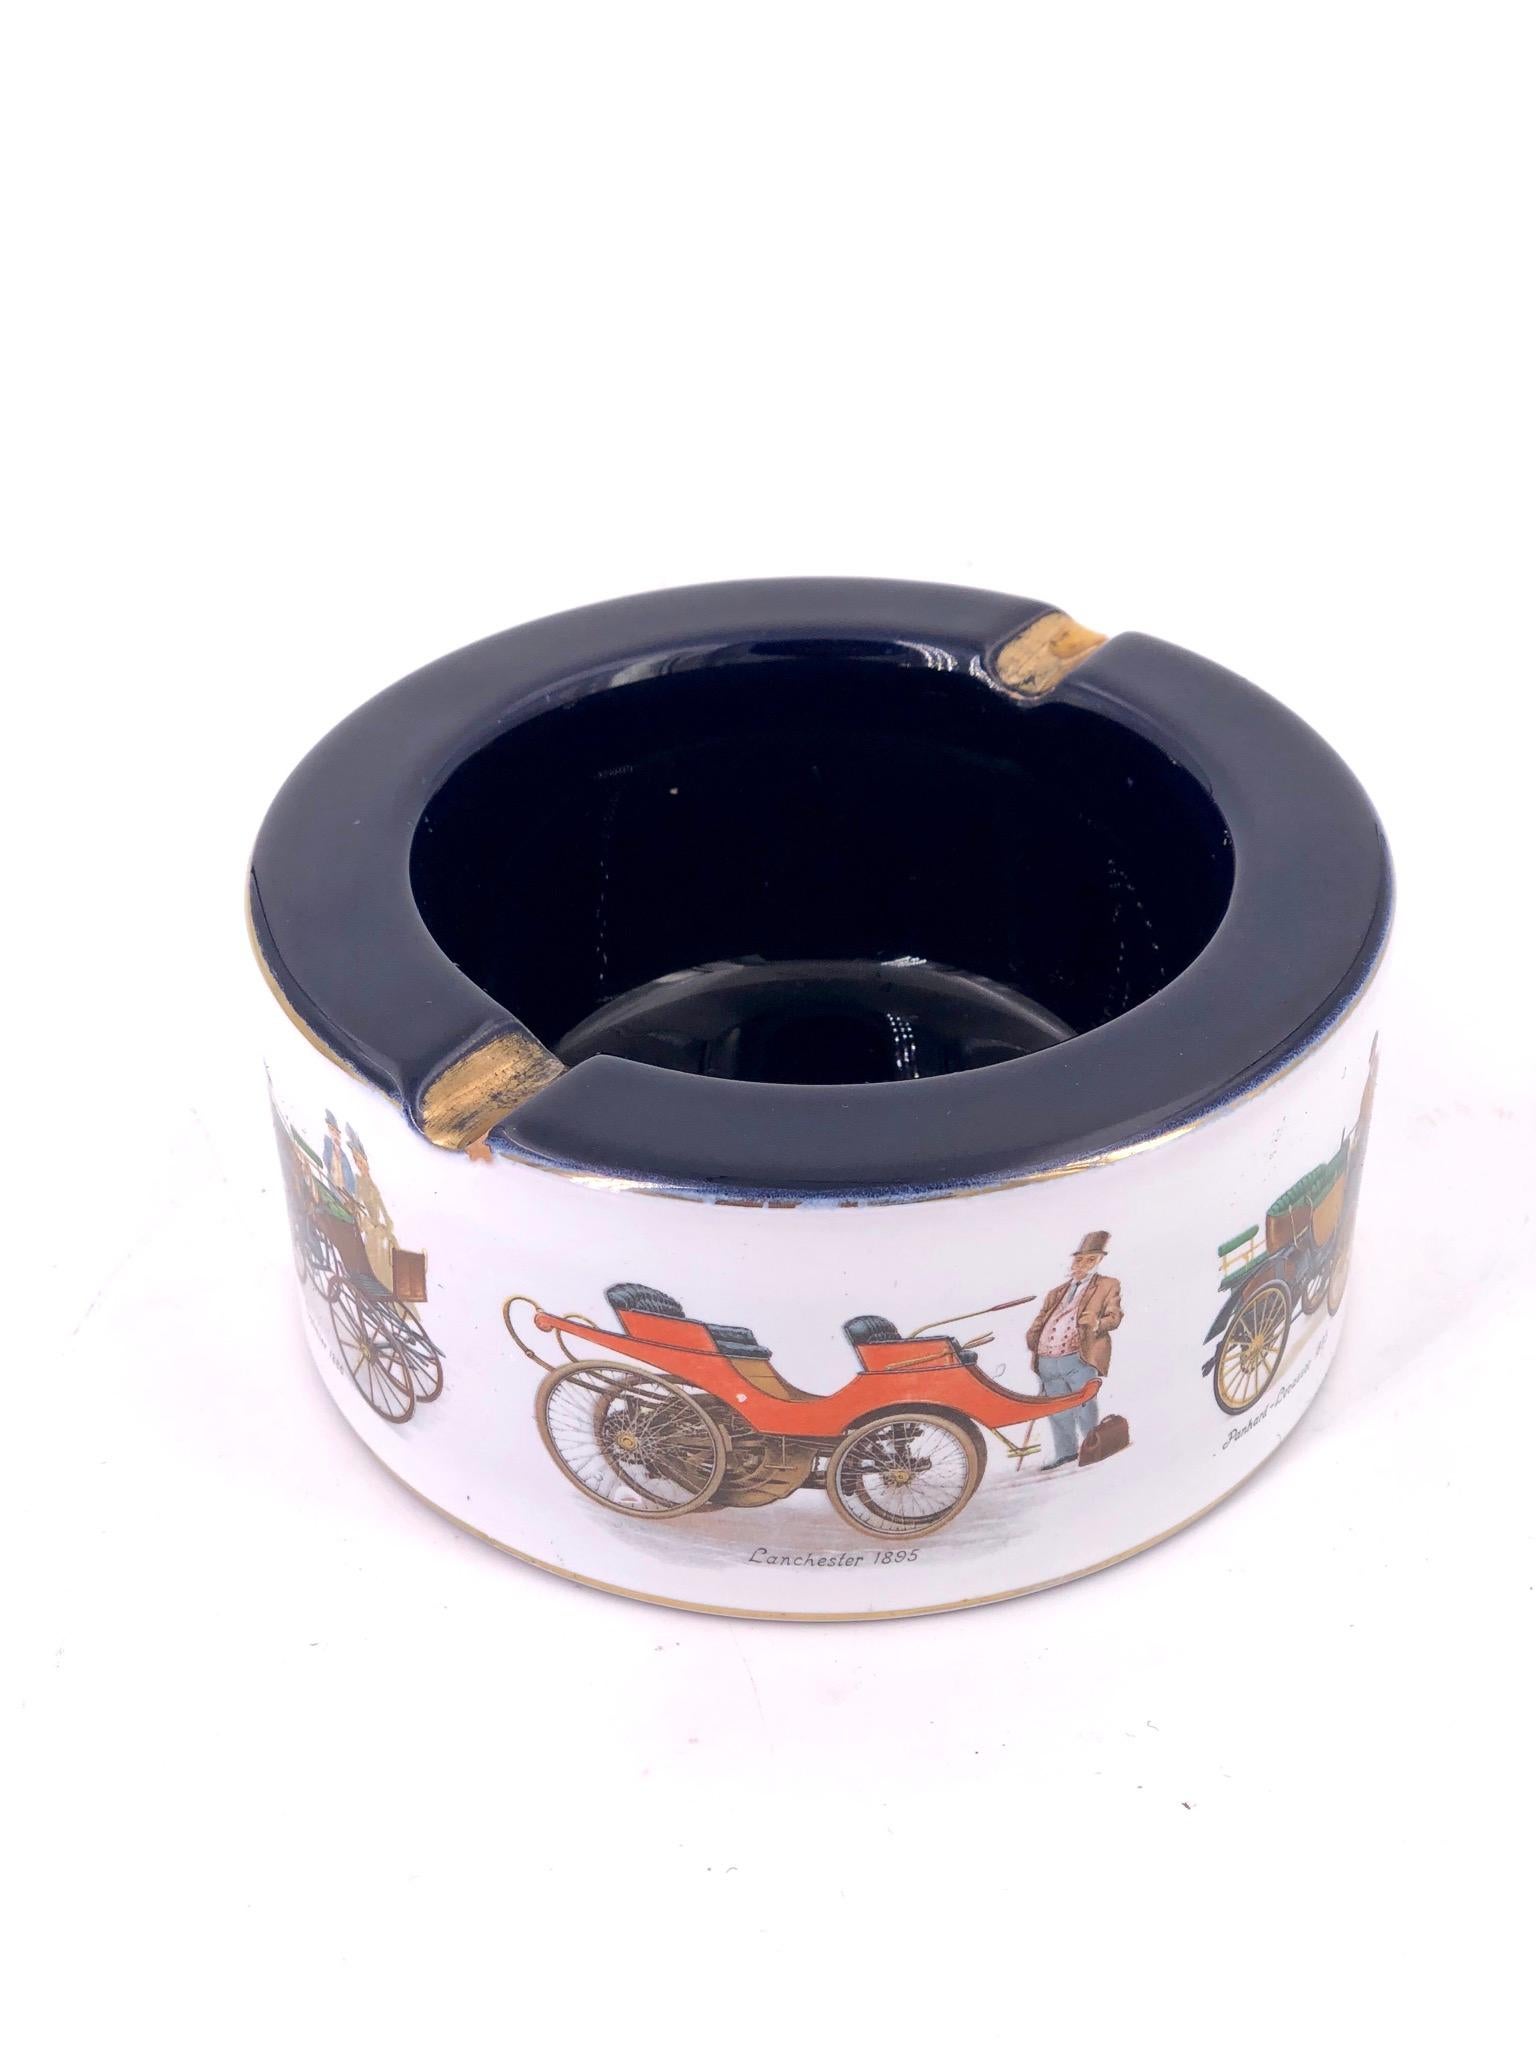 20th Century Italian Hand Painted Porcelain Ashtray with Antique Cars & Gold Accents For Sale